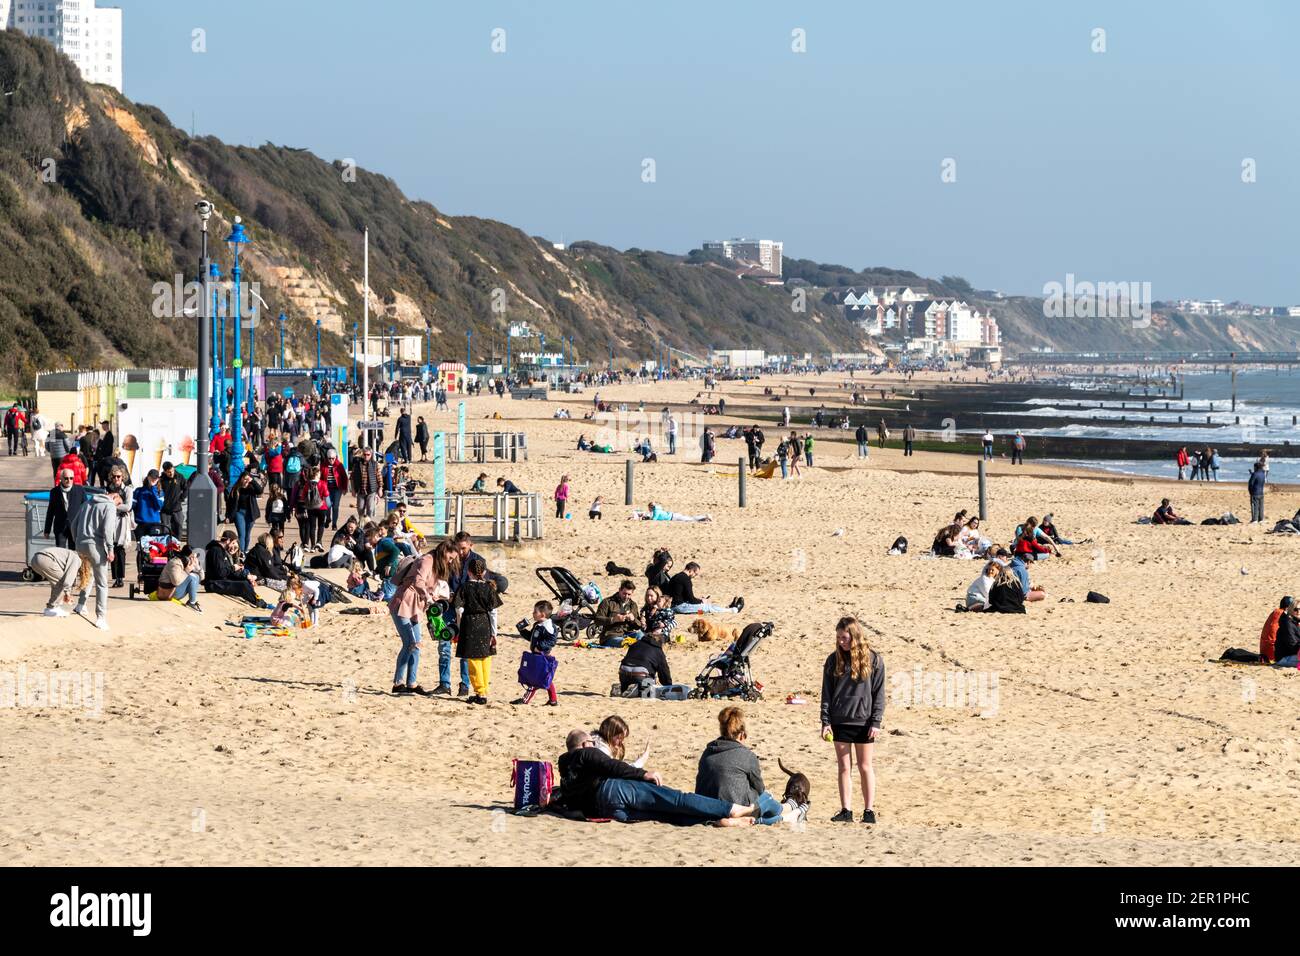 Bournemouth, UK. Sunday 28 March 2021. Crowds of people on Bournemouth beach with some social distancing. Credit: Thomas Faull/Alamy Live News Stock Photo